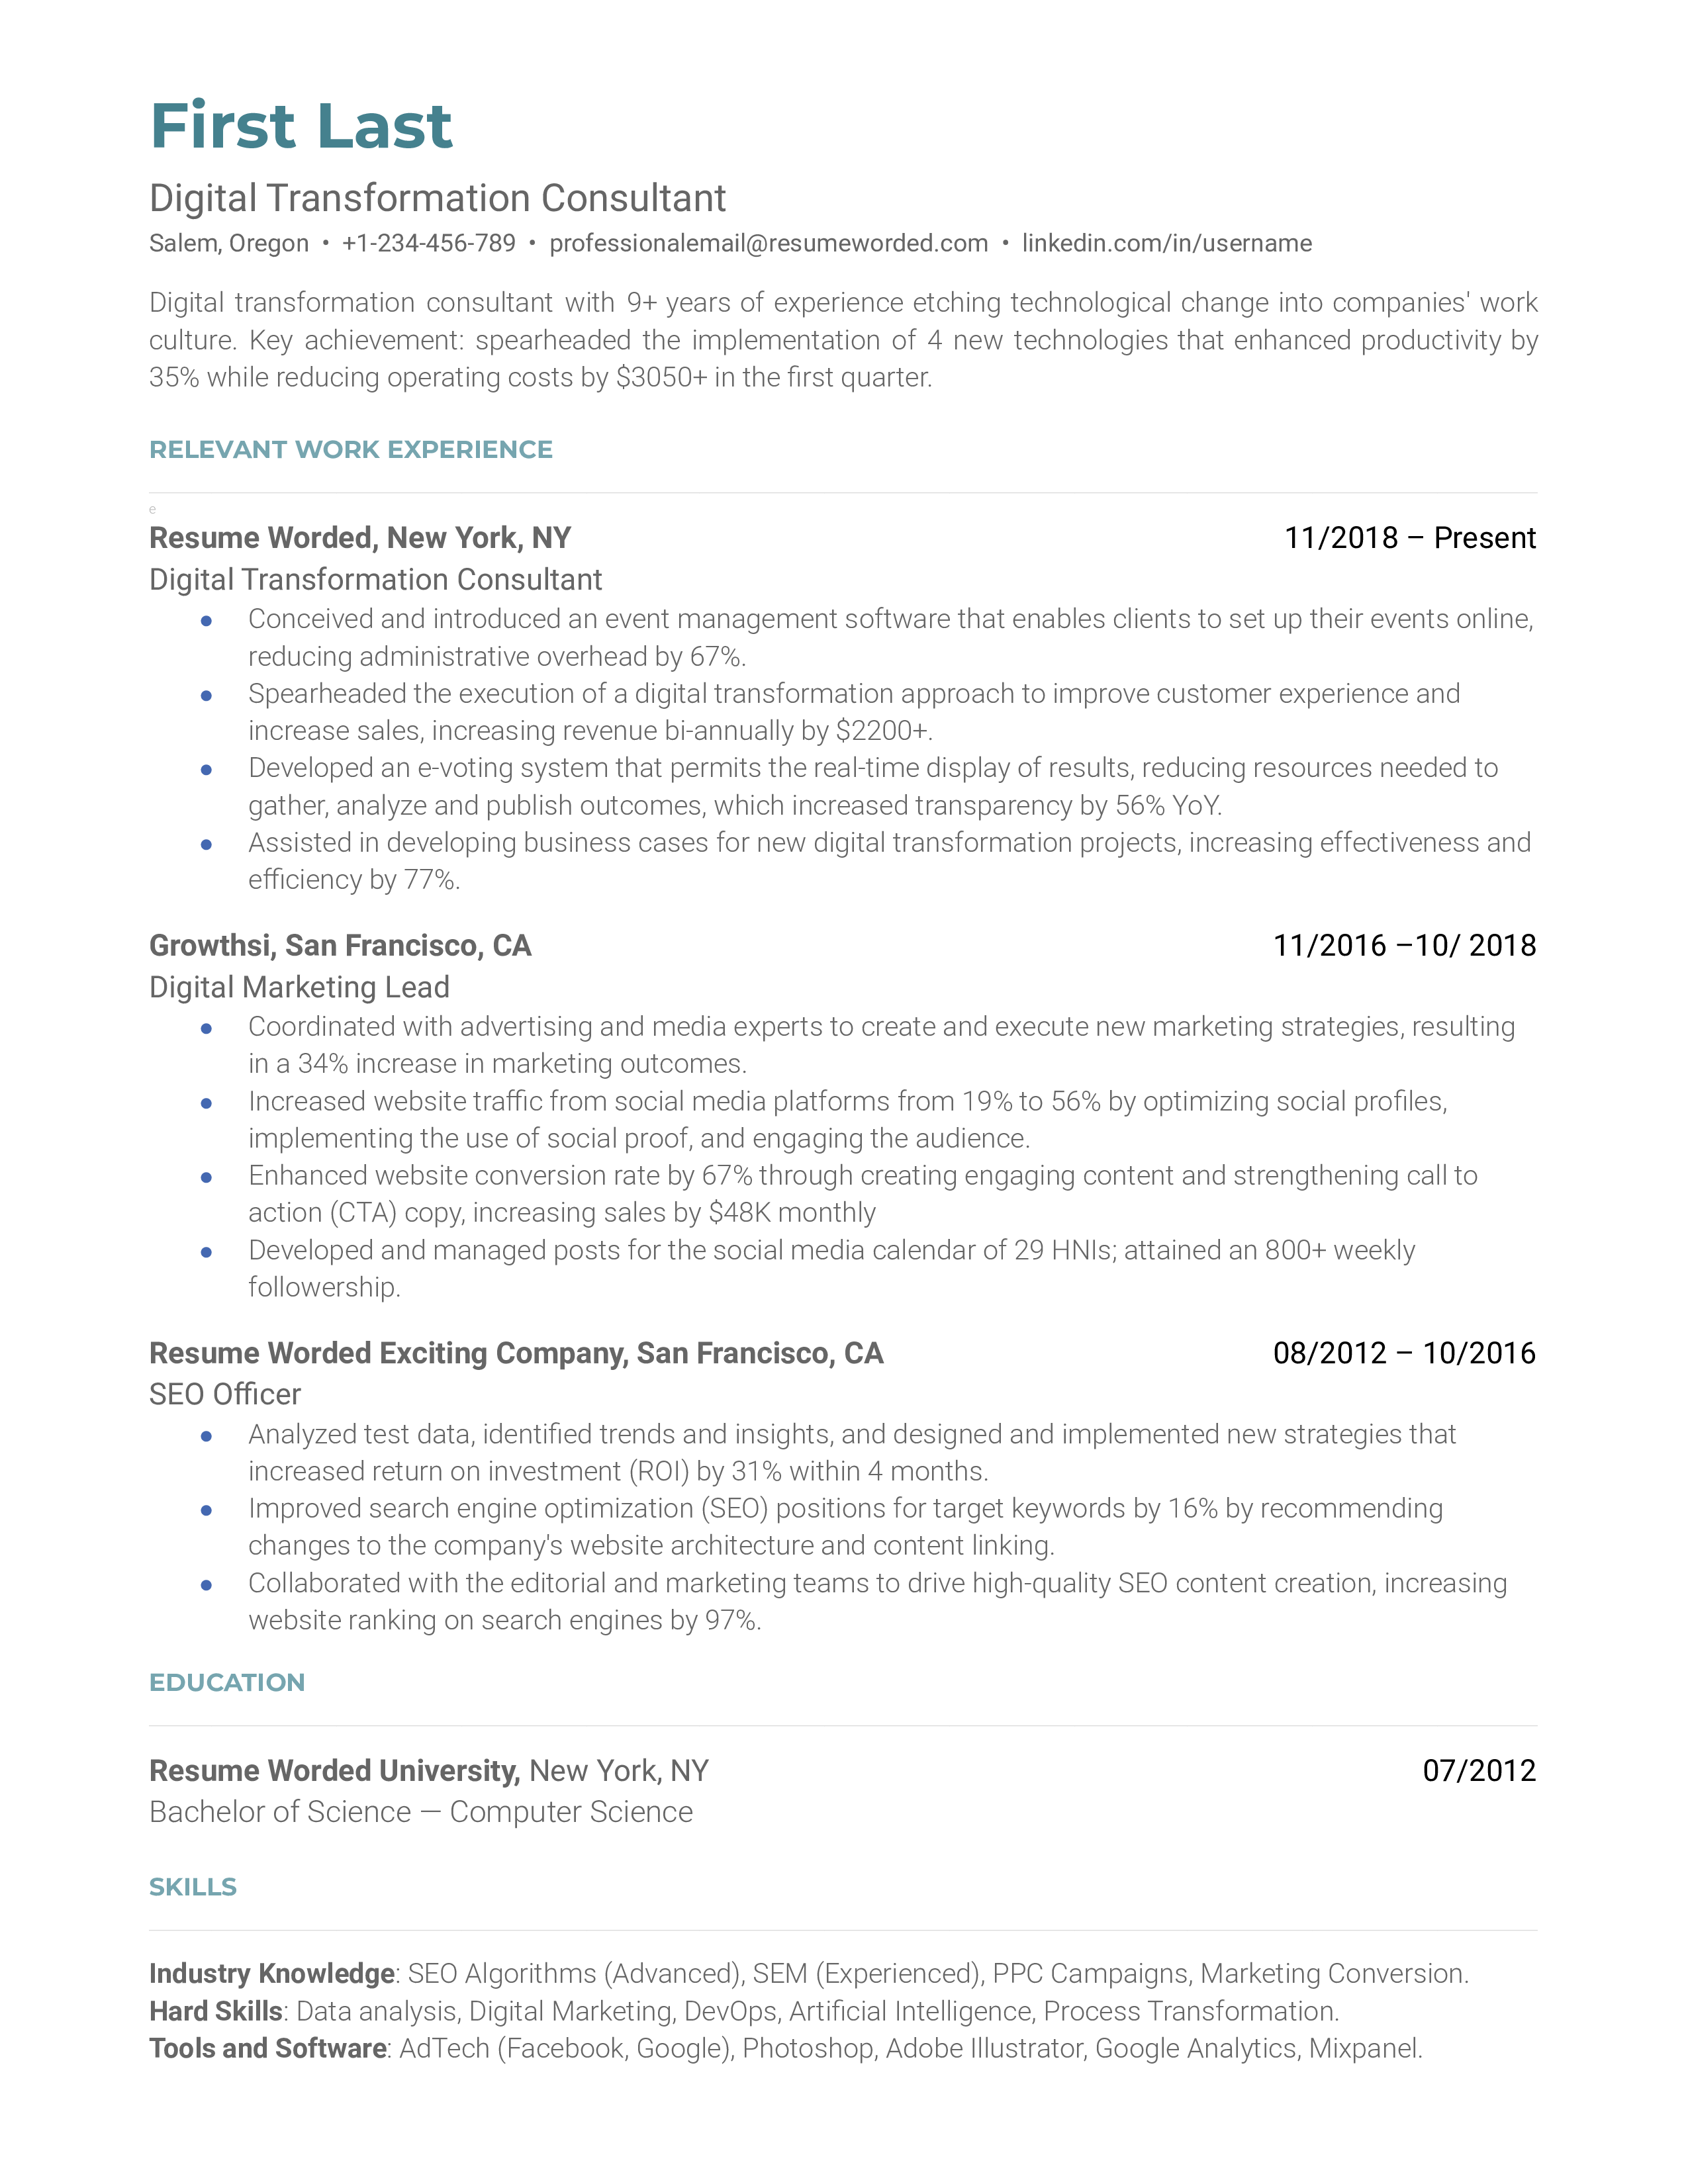 A digital transformation consultant resume sample that highlights the applicant’s skills and extensive experience.